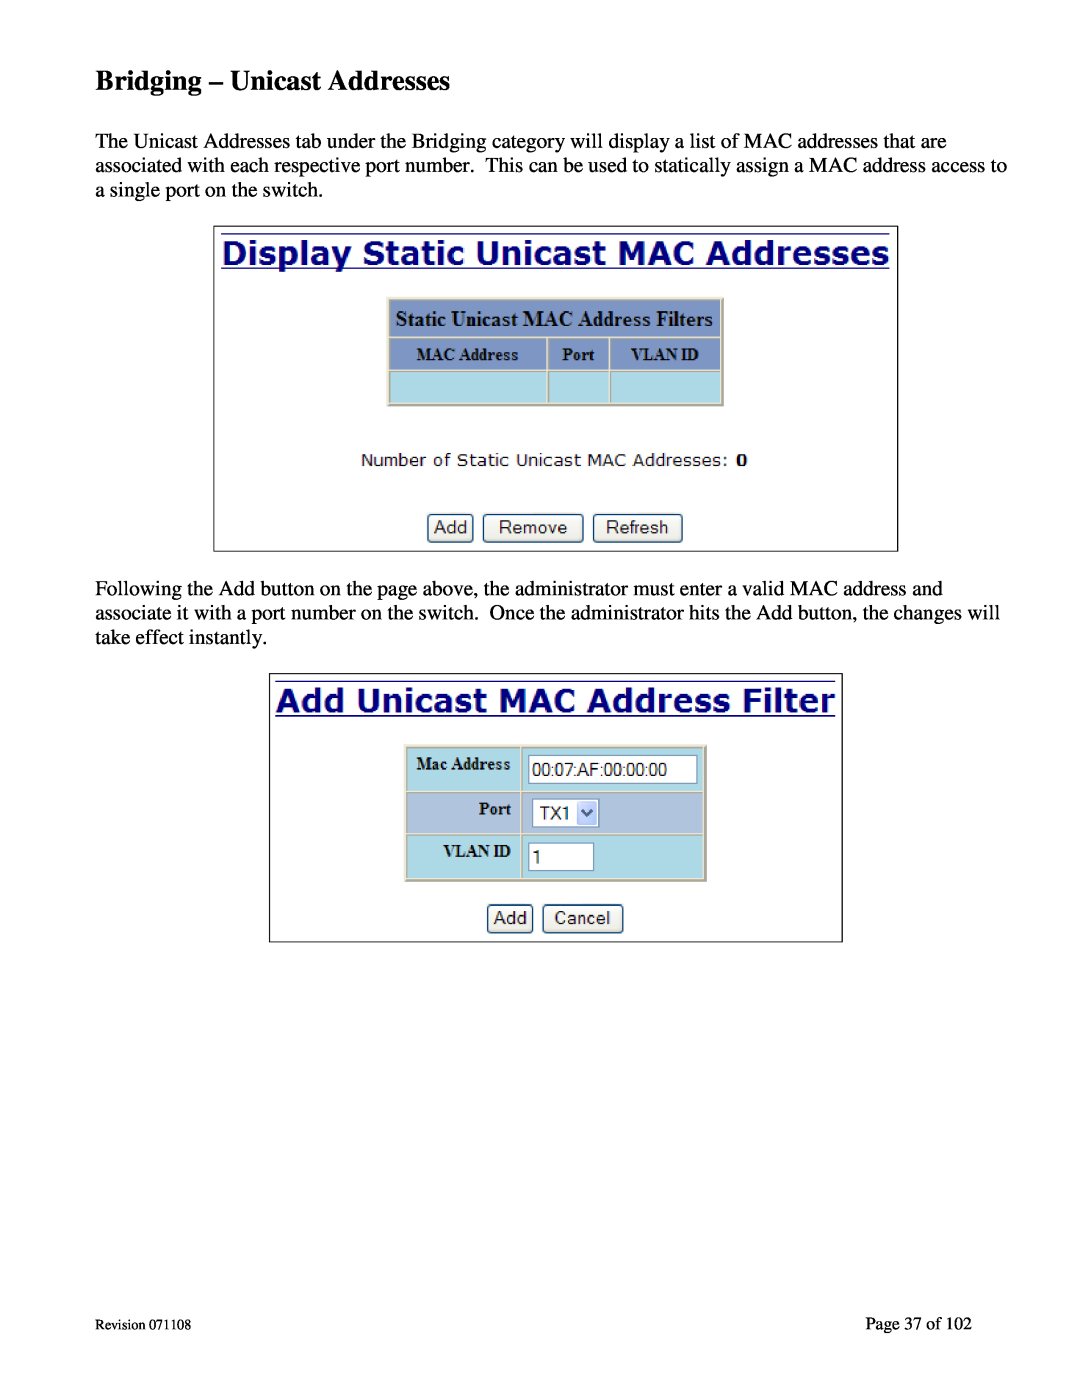 N-Tron 708M12 user manual Bridging - Unicast Addresses, Page 37 of 